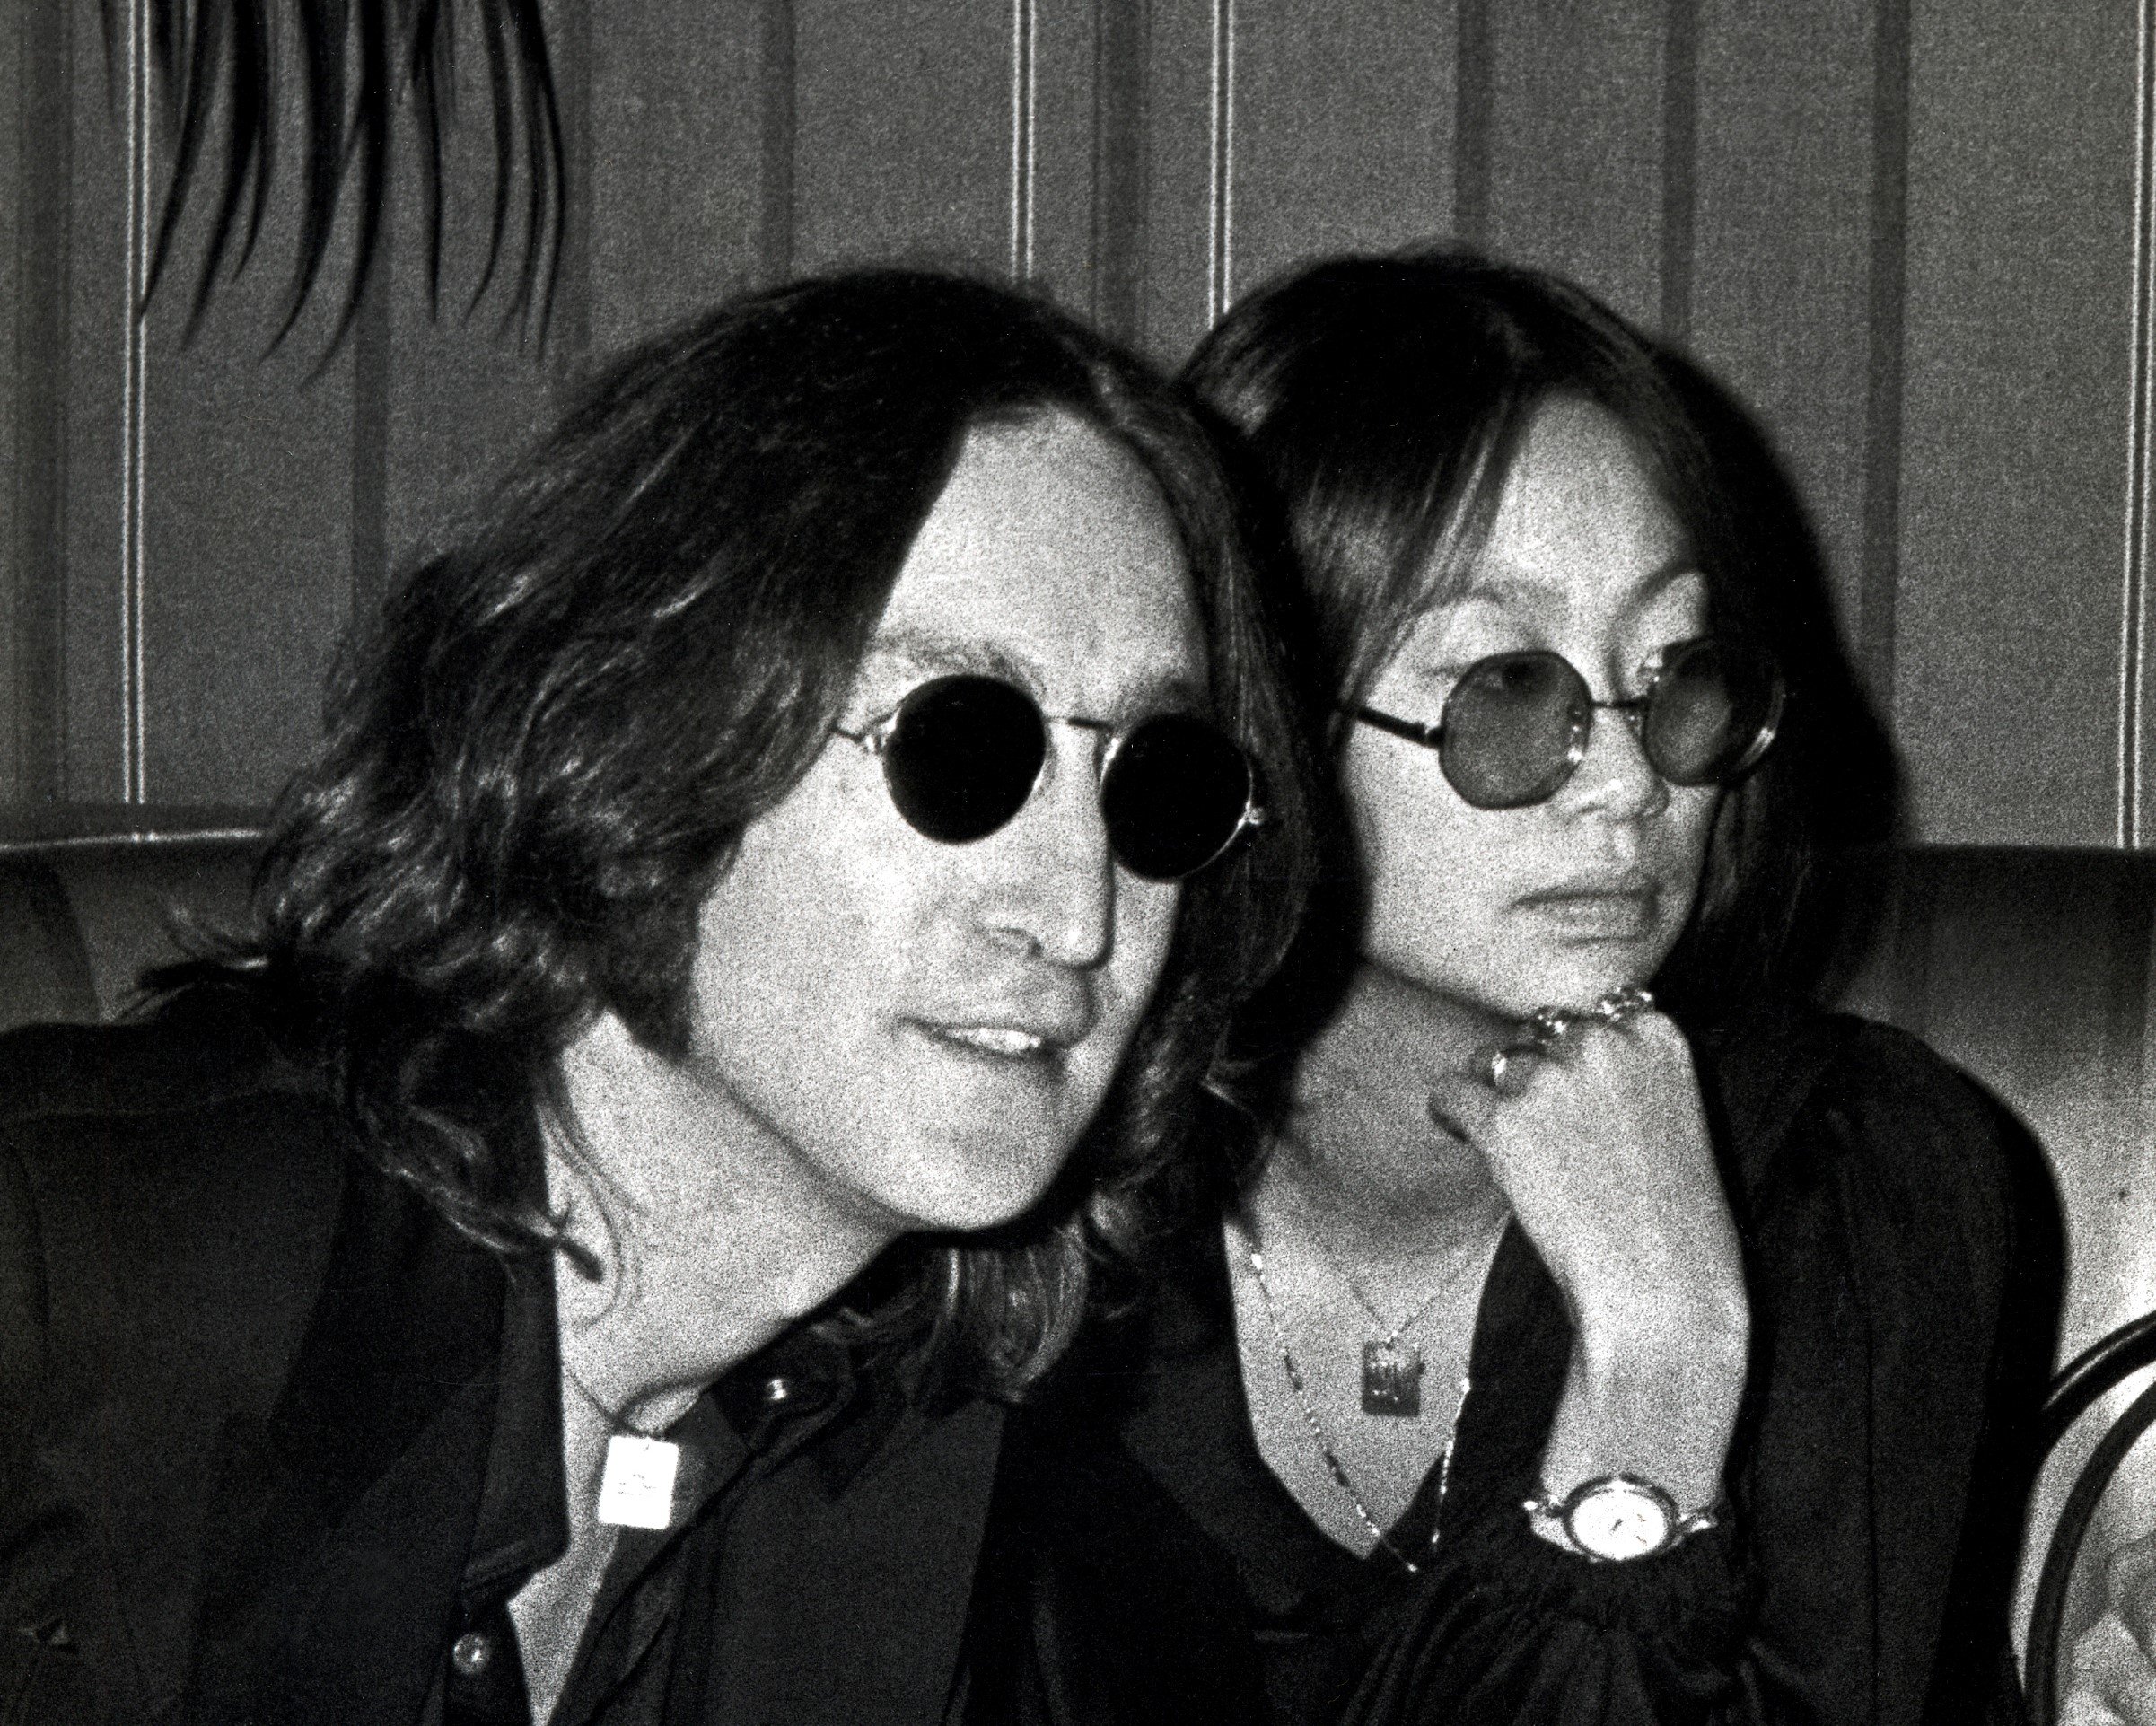 A black and white picture of John Lennon and May Pang sitting together and wearing sunglasses.